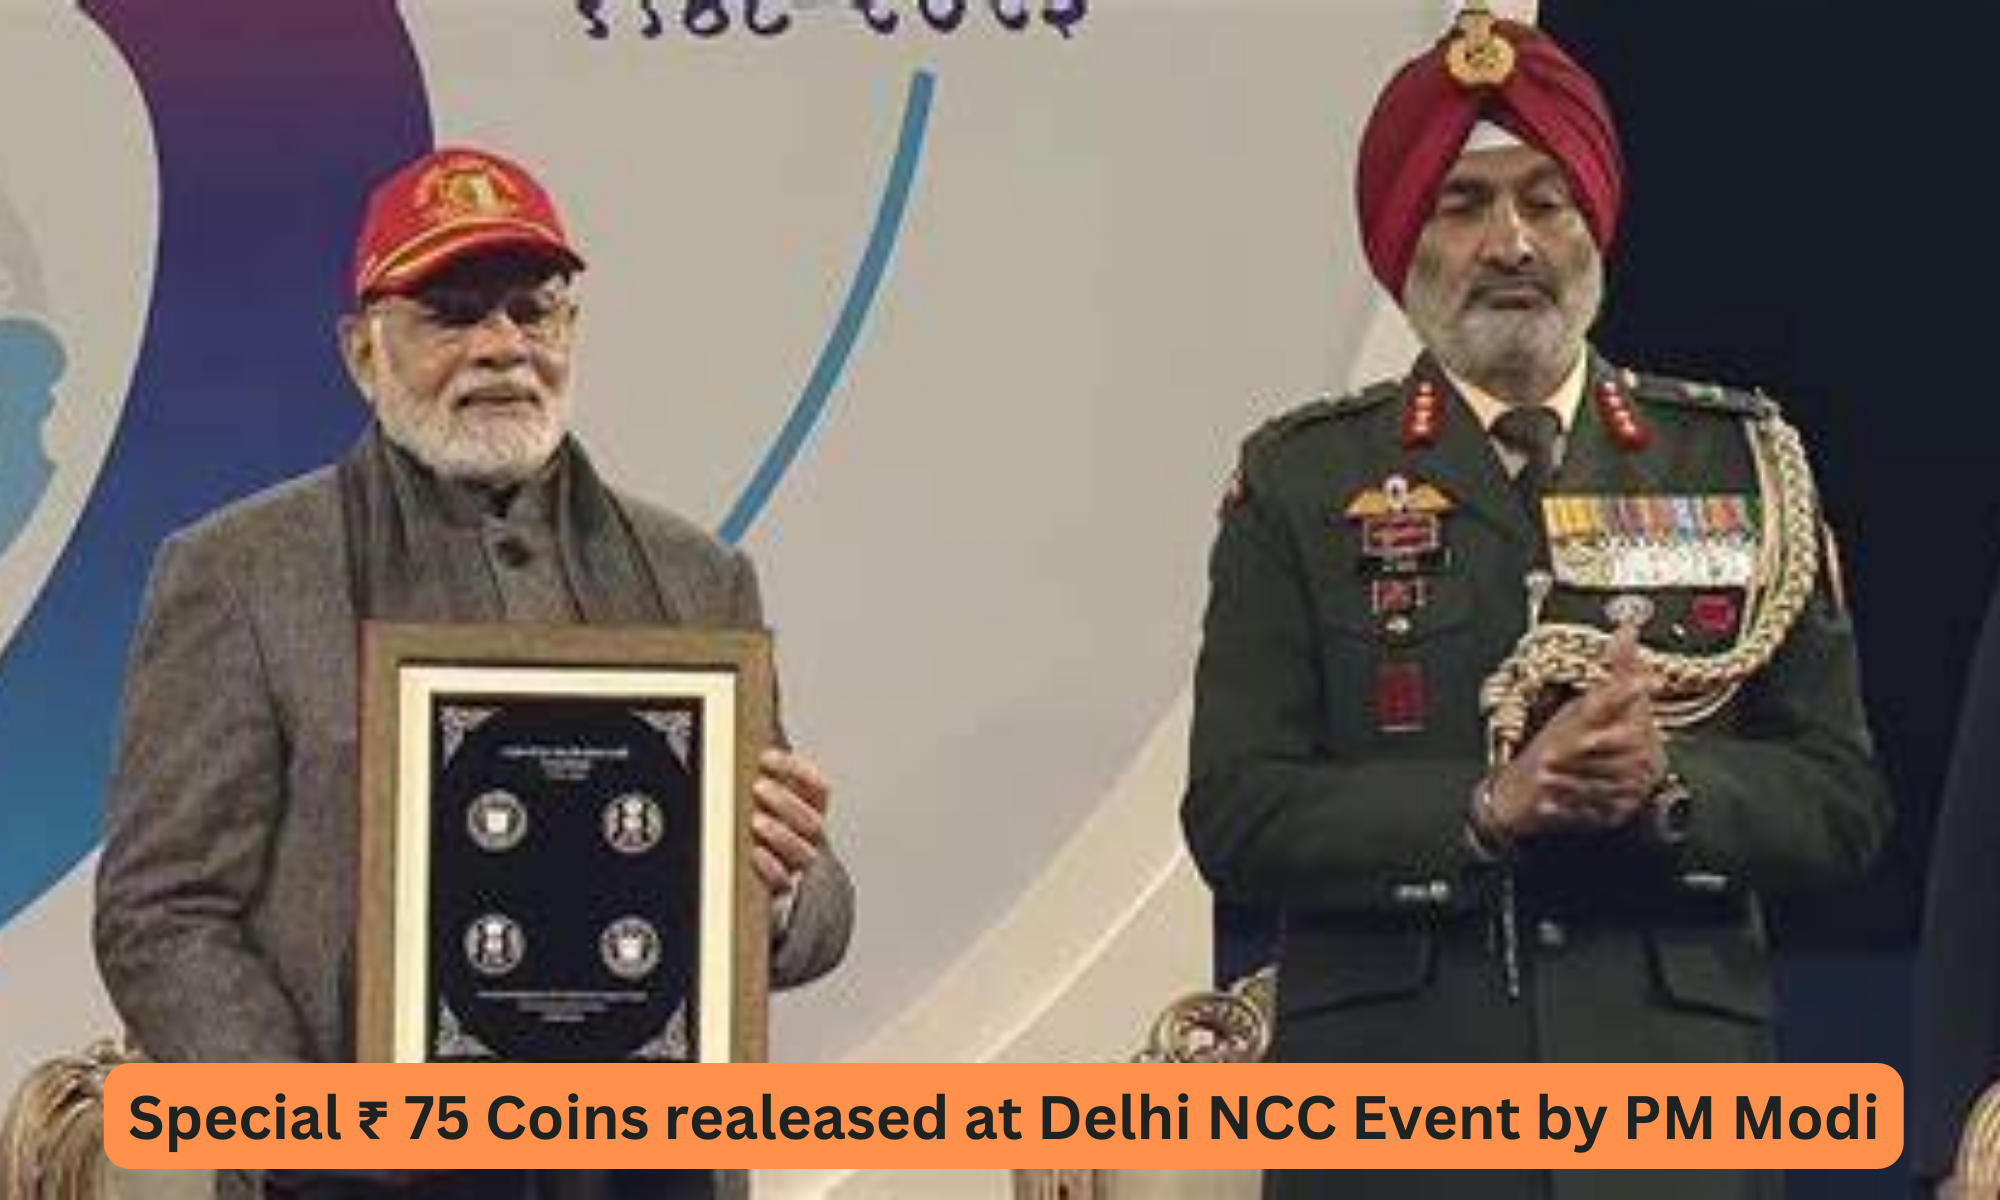 Special ₹ 75 Coins realeased at Delhi NCC Event by PM Modi